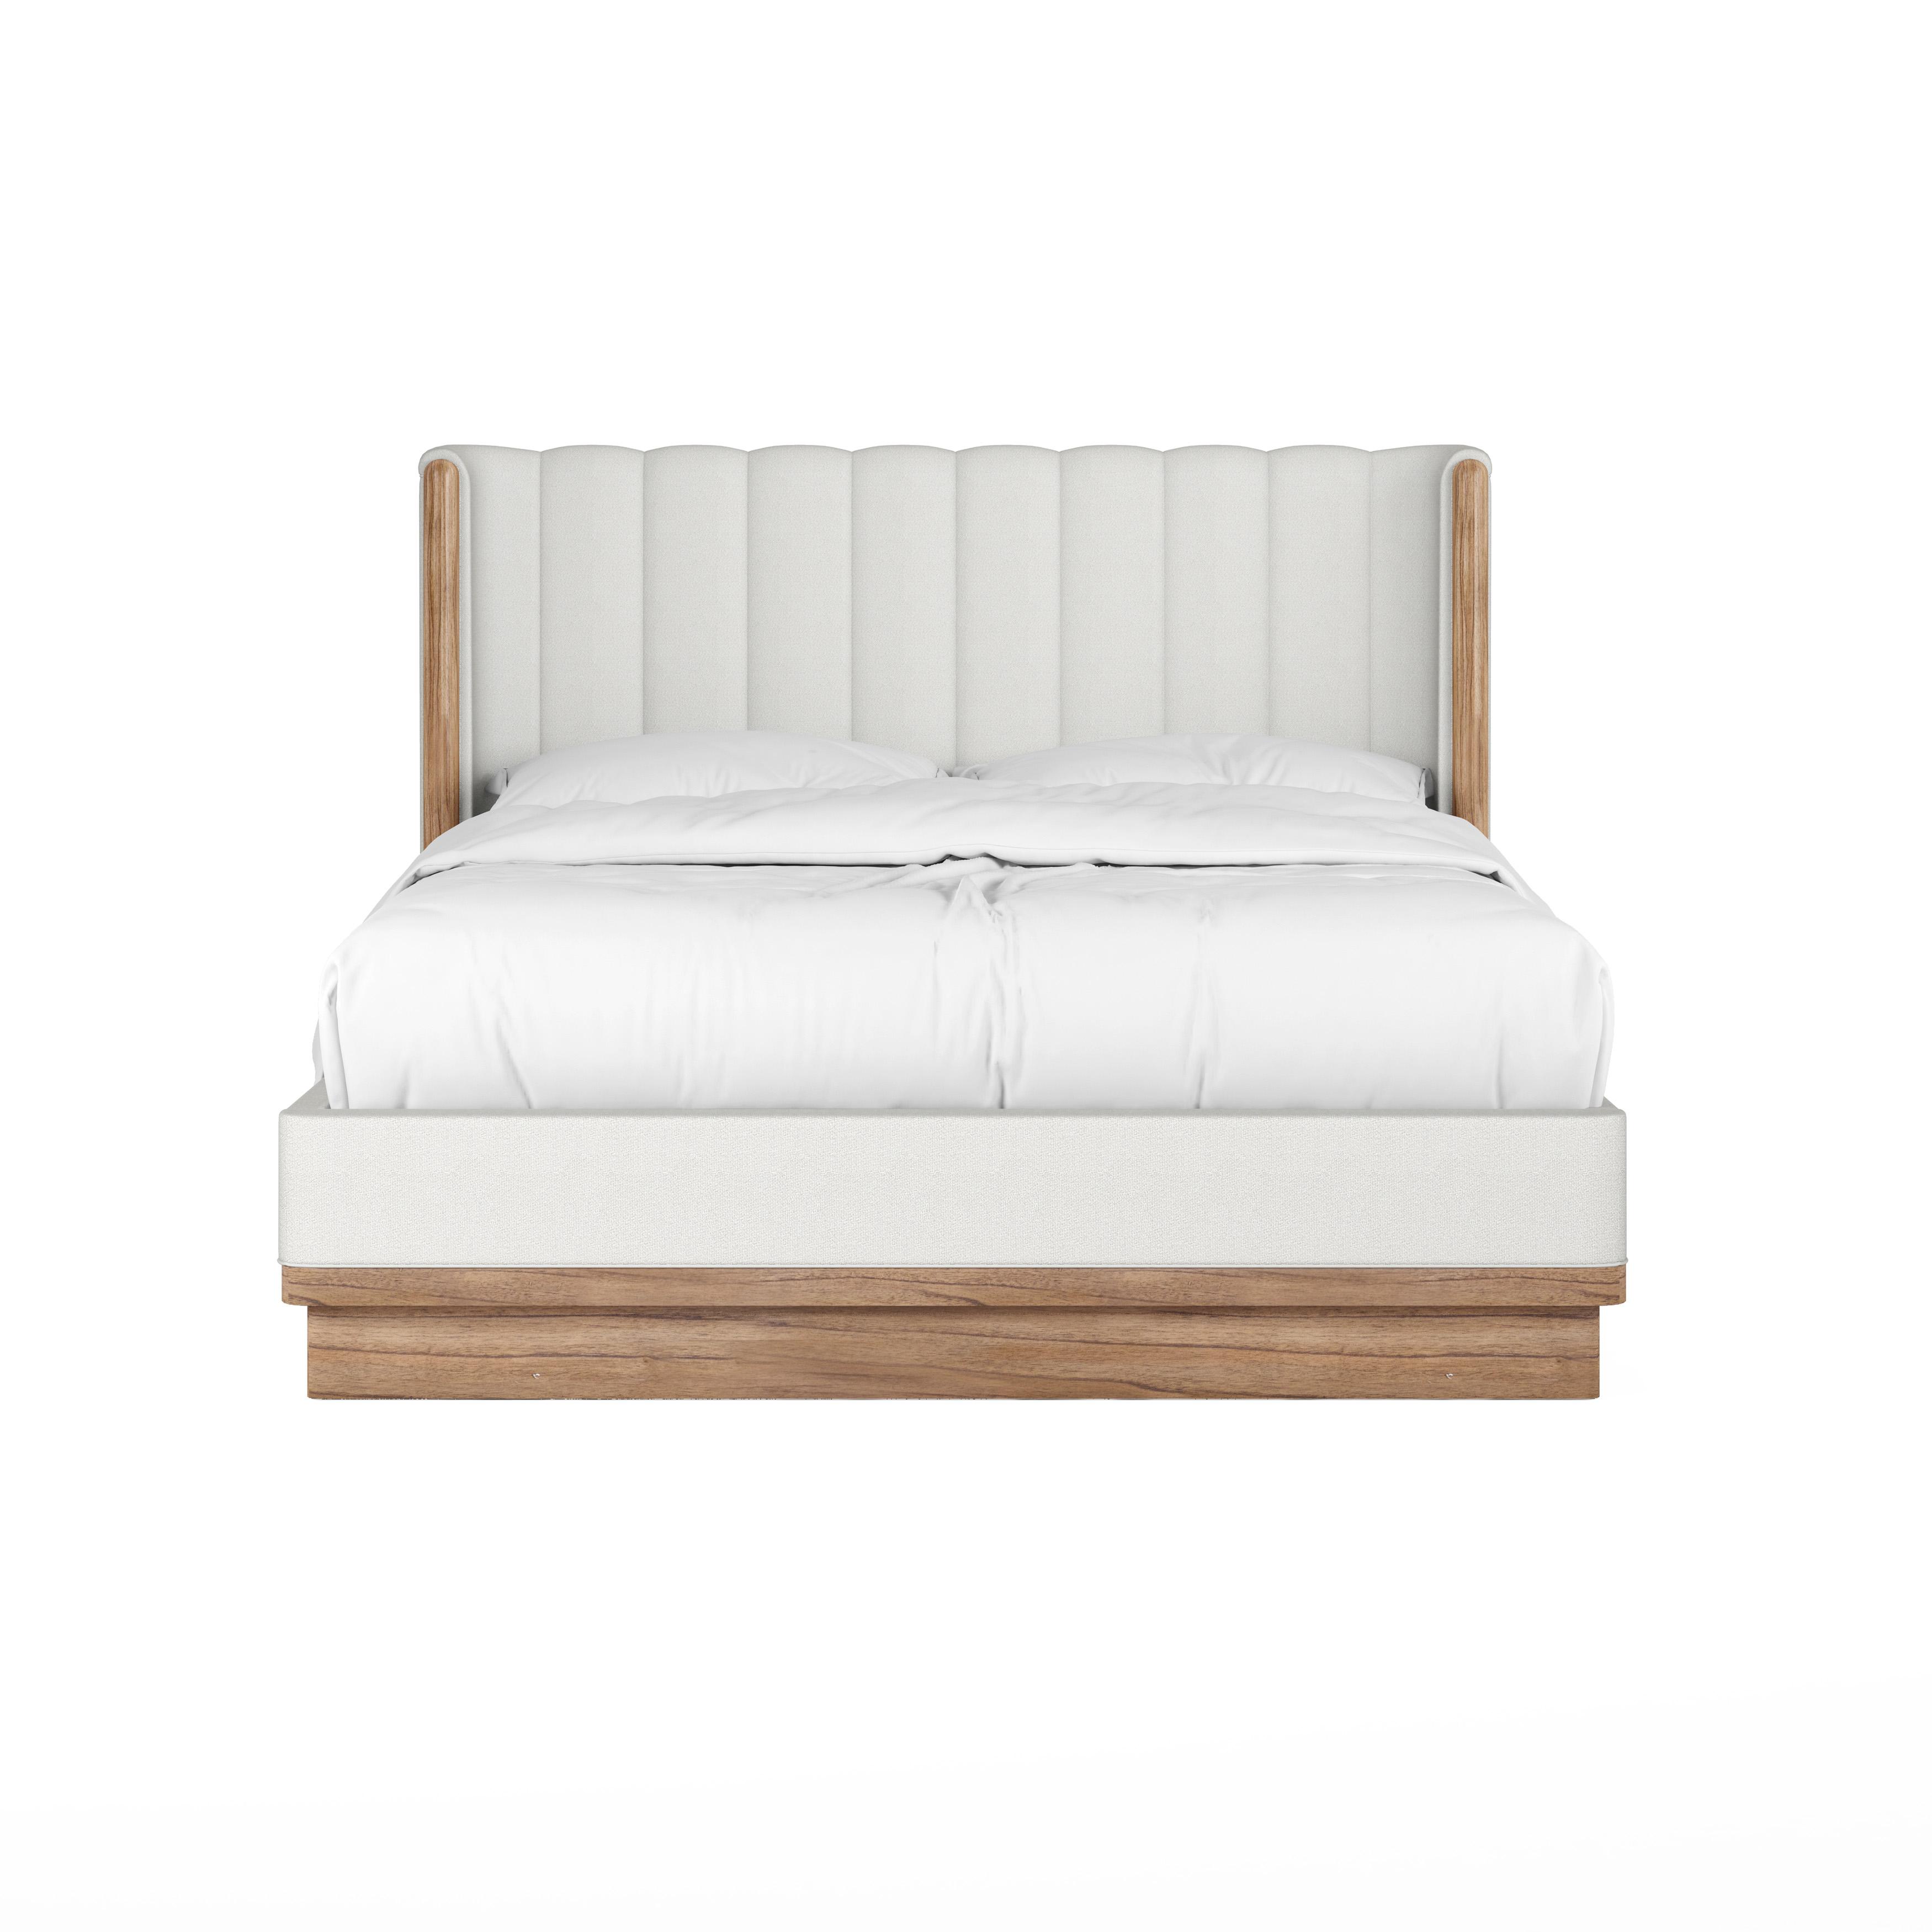 Traditional, Casual Panel Bed Portico 323137-3335 in White, Brown 